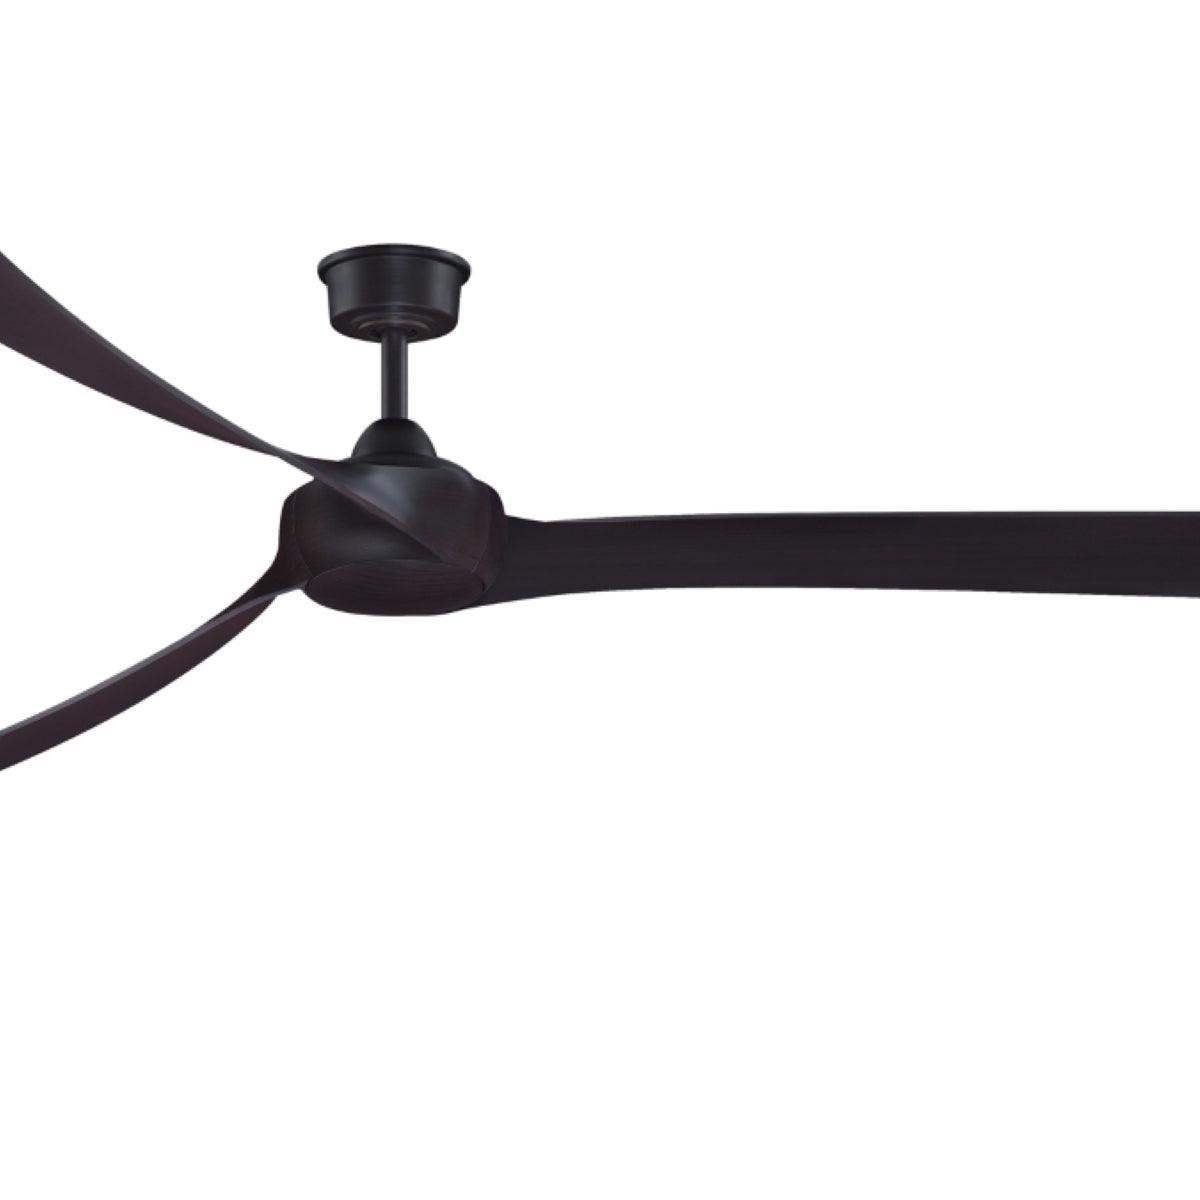 Wrap Custom Indoor/Outdoor Ceiling Fan Motor With Remote, Dark Bronze Finish, 64-84" Blades Sold Separately - Bees Lighting